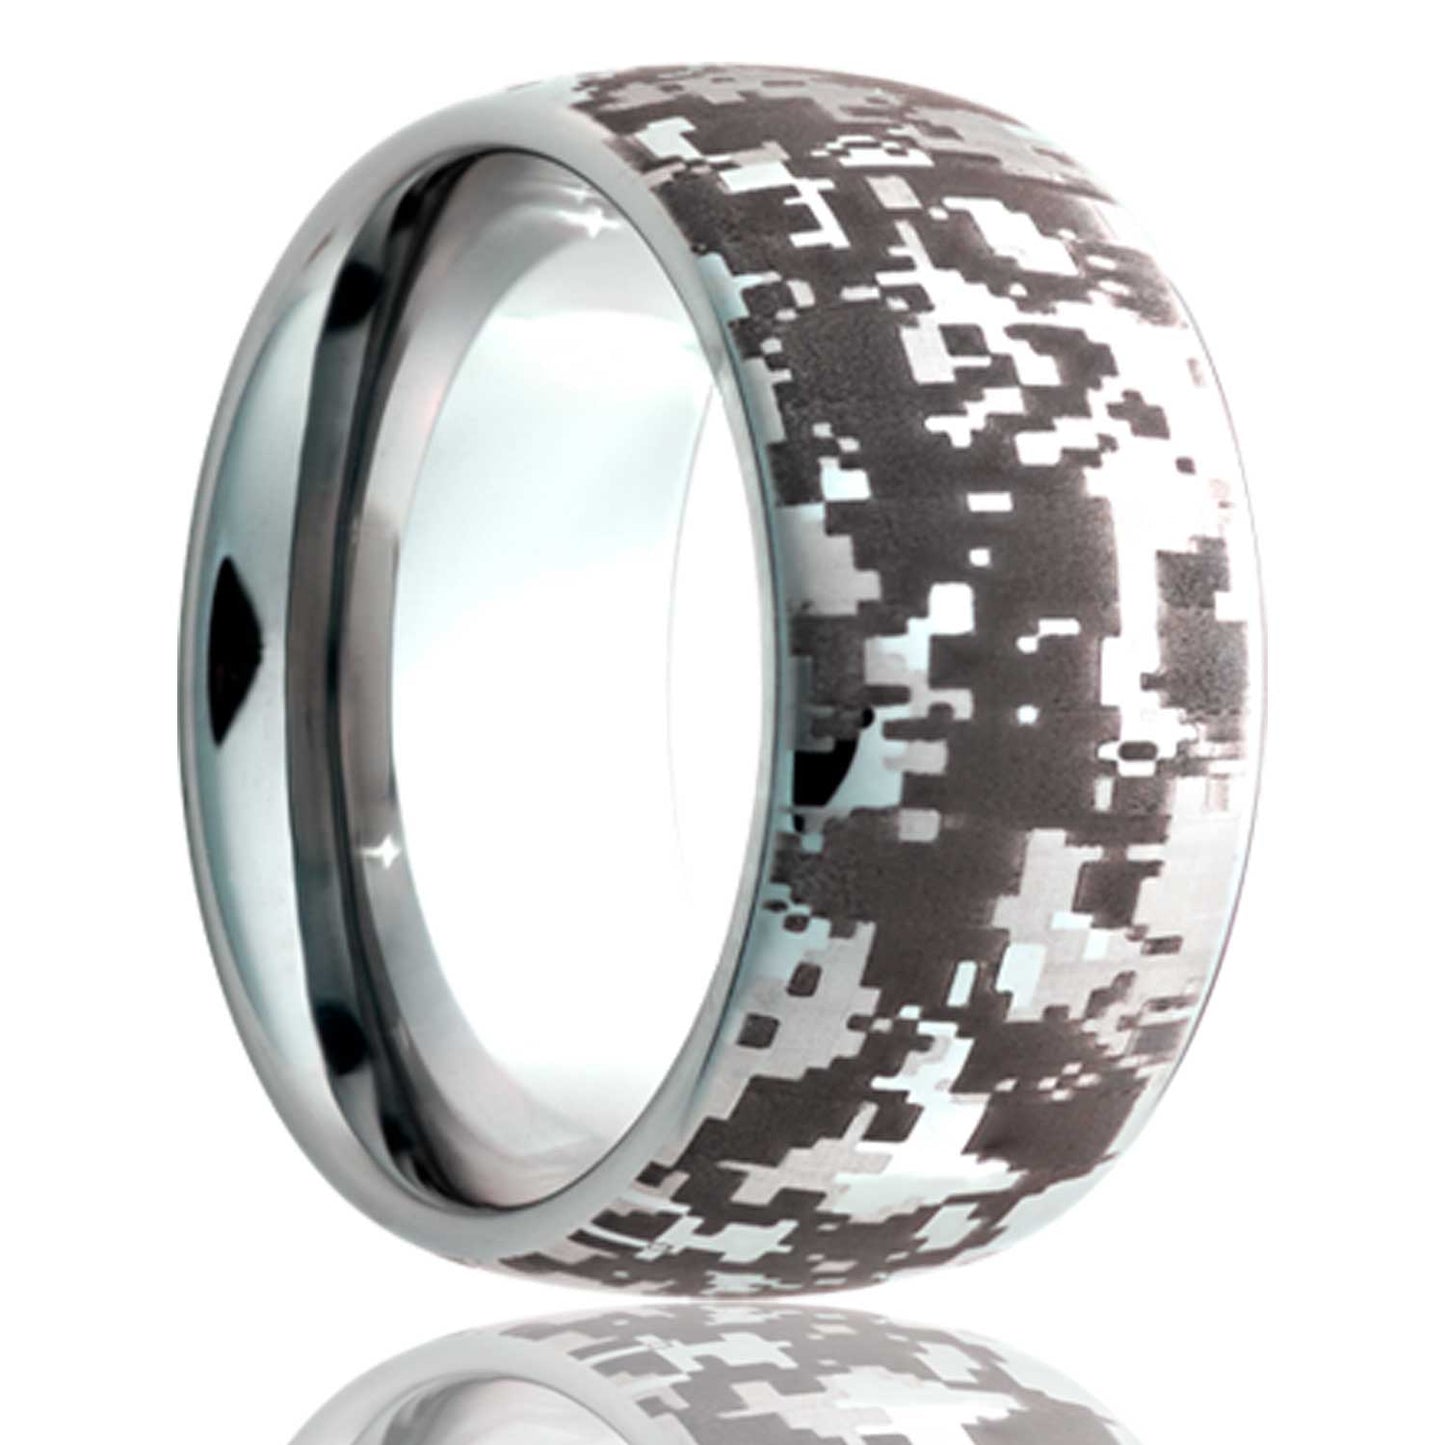 A digital camo domed titanium wedding band displayed on a neutral white background.